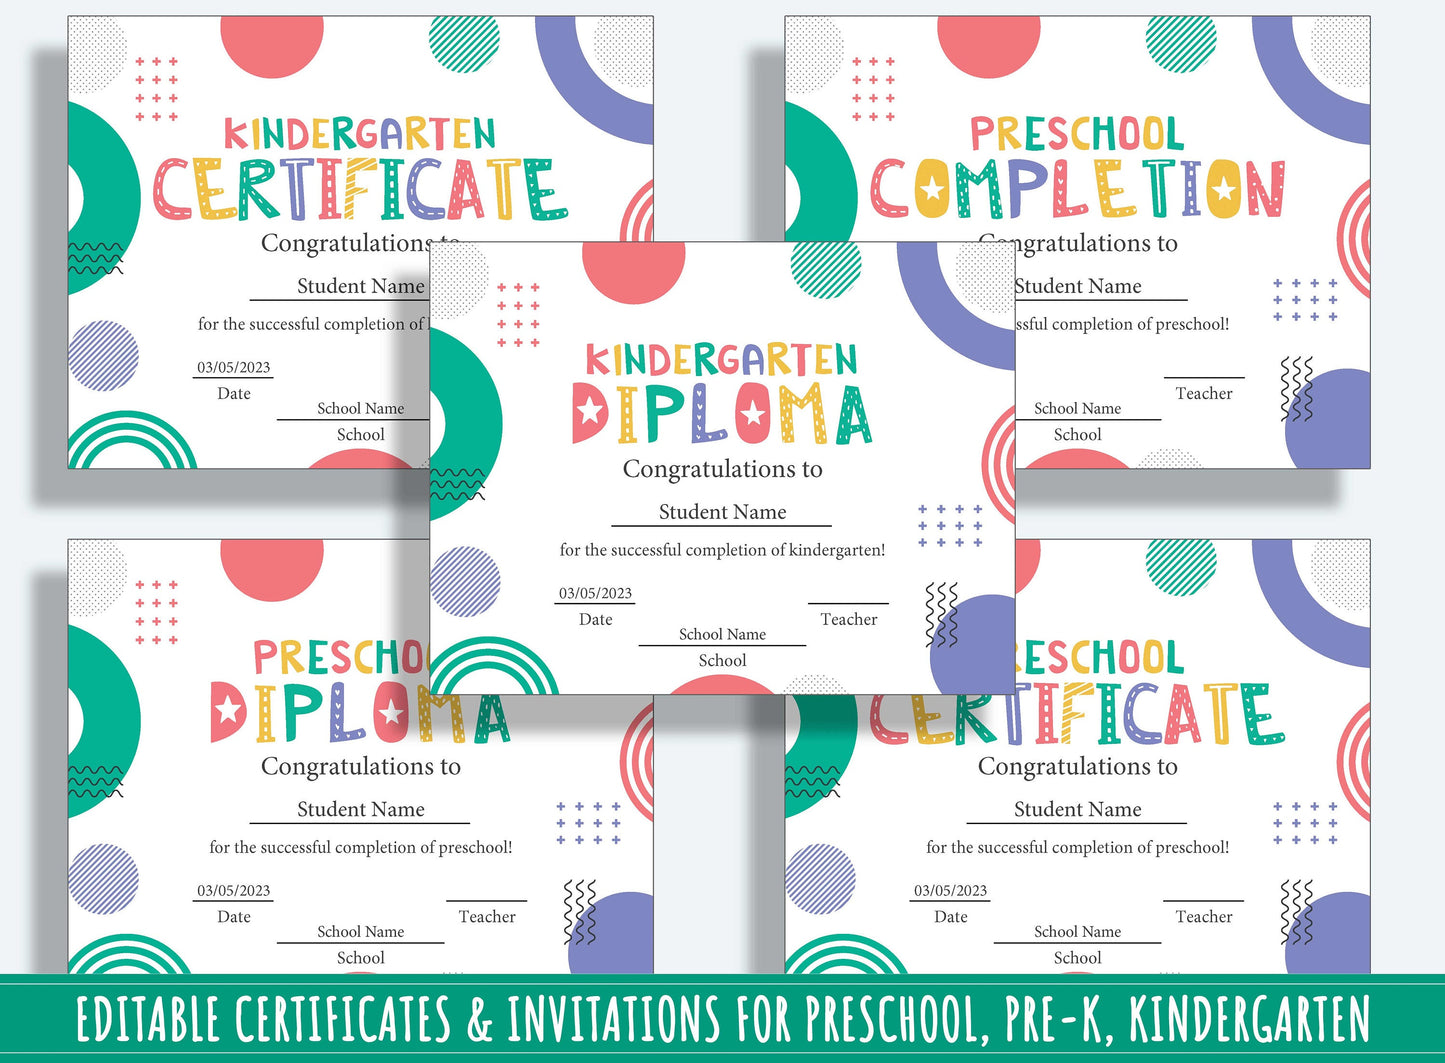 Student Council Certificate, Editable End of Year Diplomas, Certificates, and Invitations for PreK and K, PDF File, Instant Download